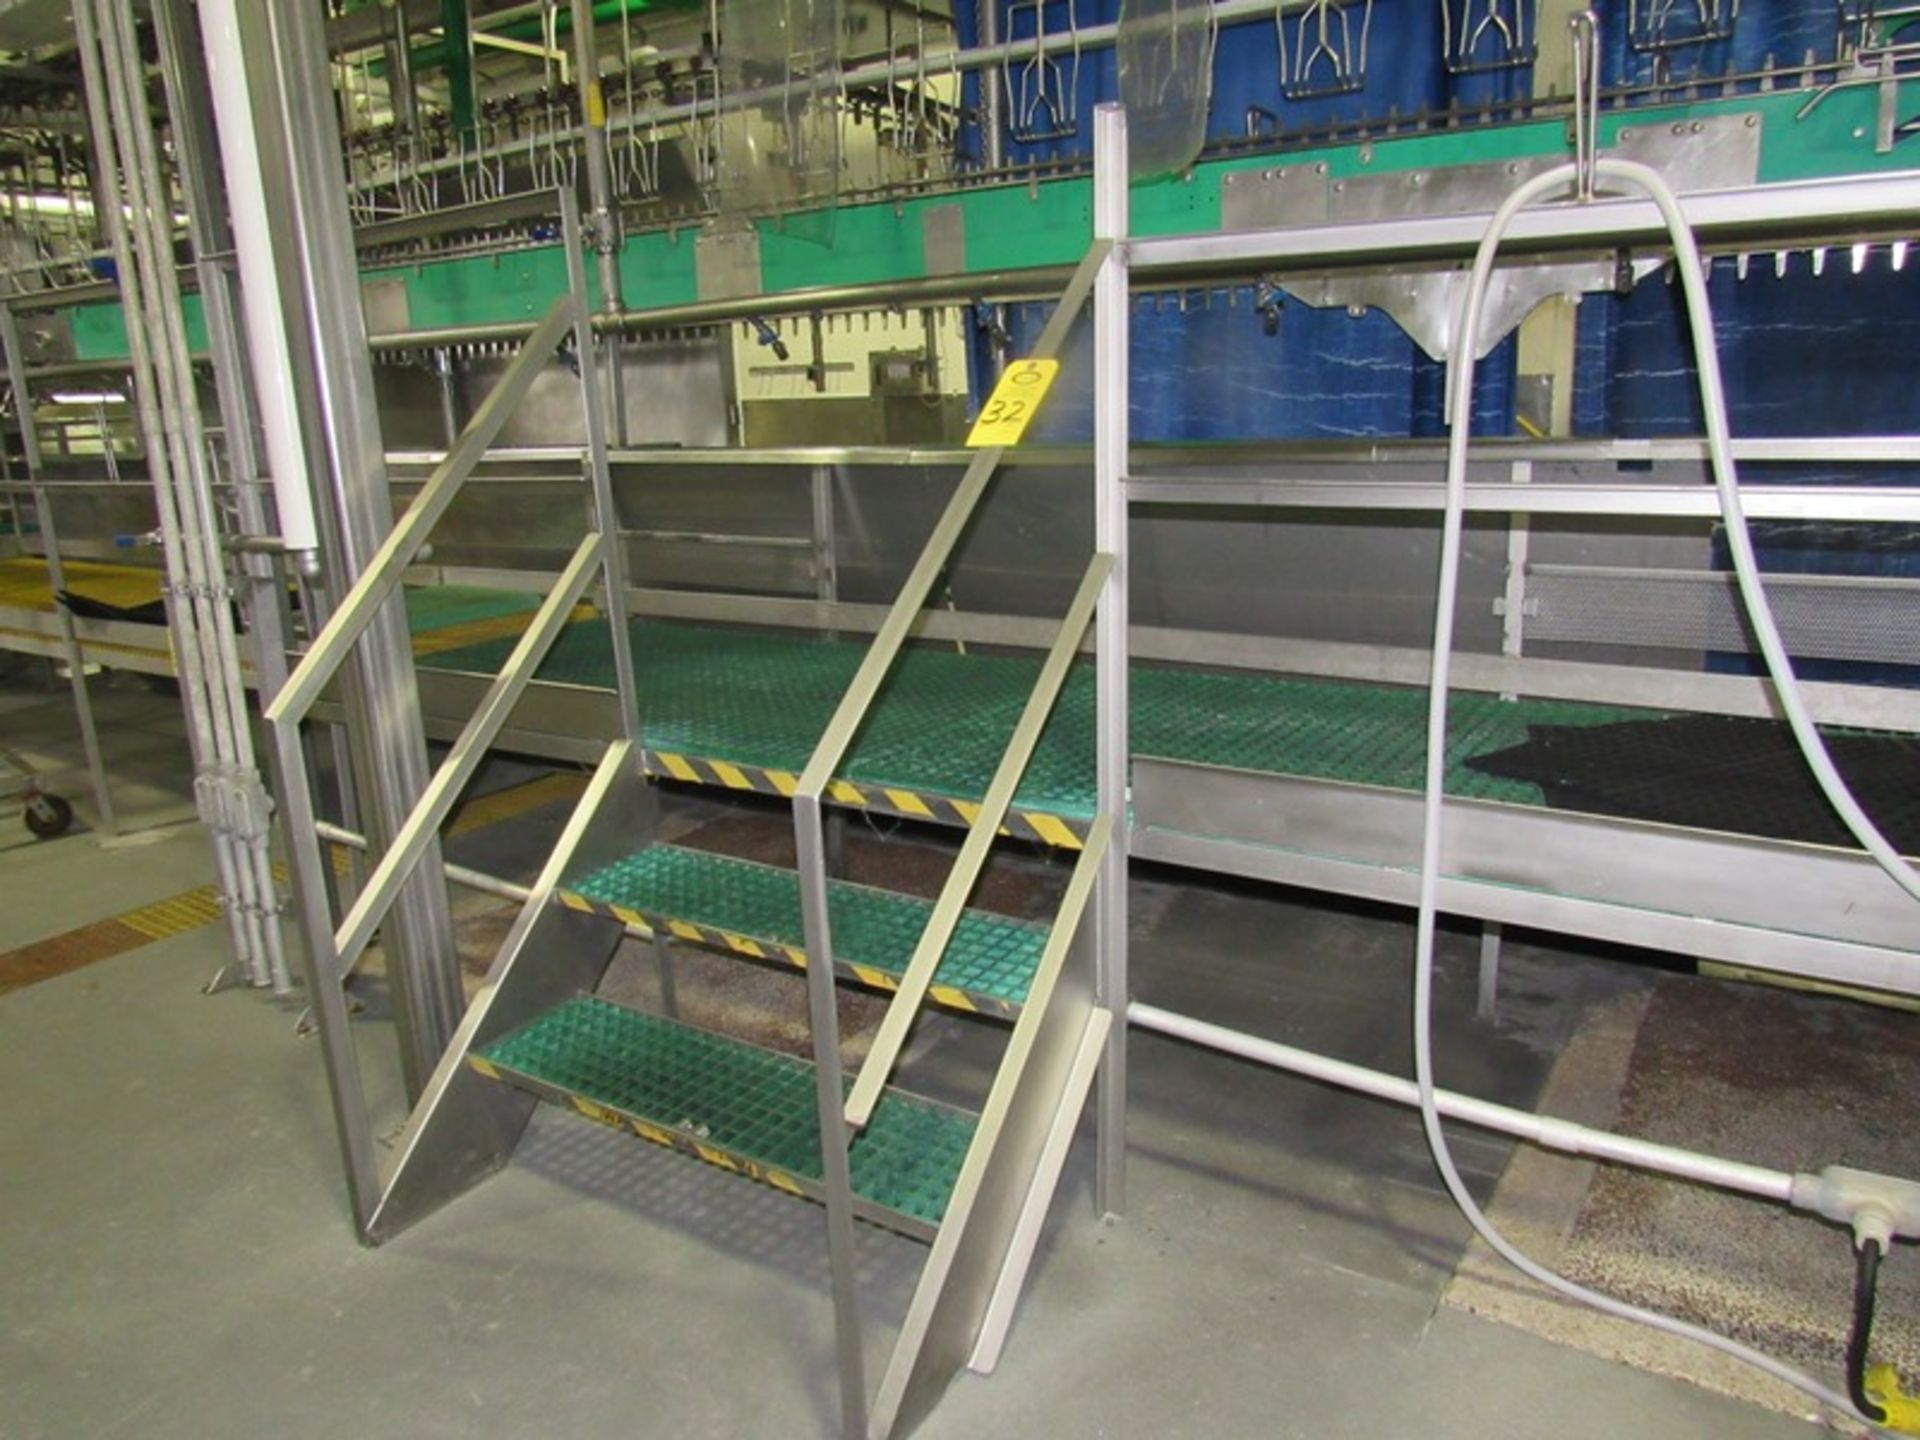 Stainless Steel Work Platform, 44" W (6' wide with stairs) X 25' L X 28" T, 6' tall | Rig Fee: $225 - Image 2 of 3